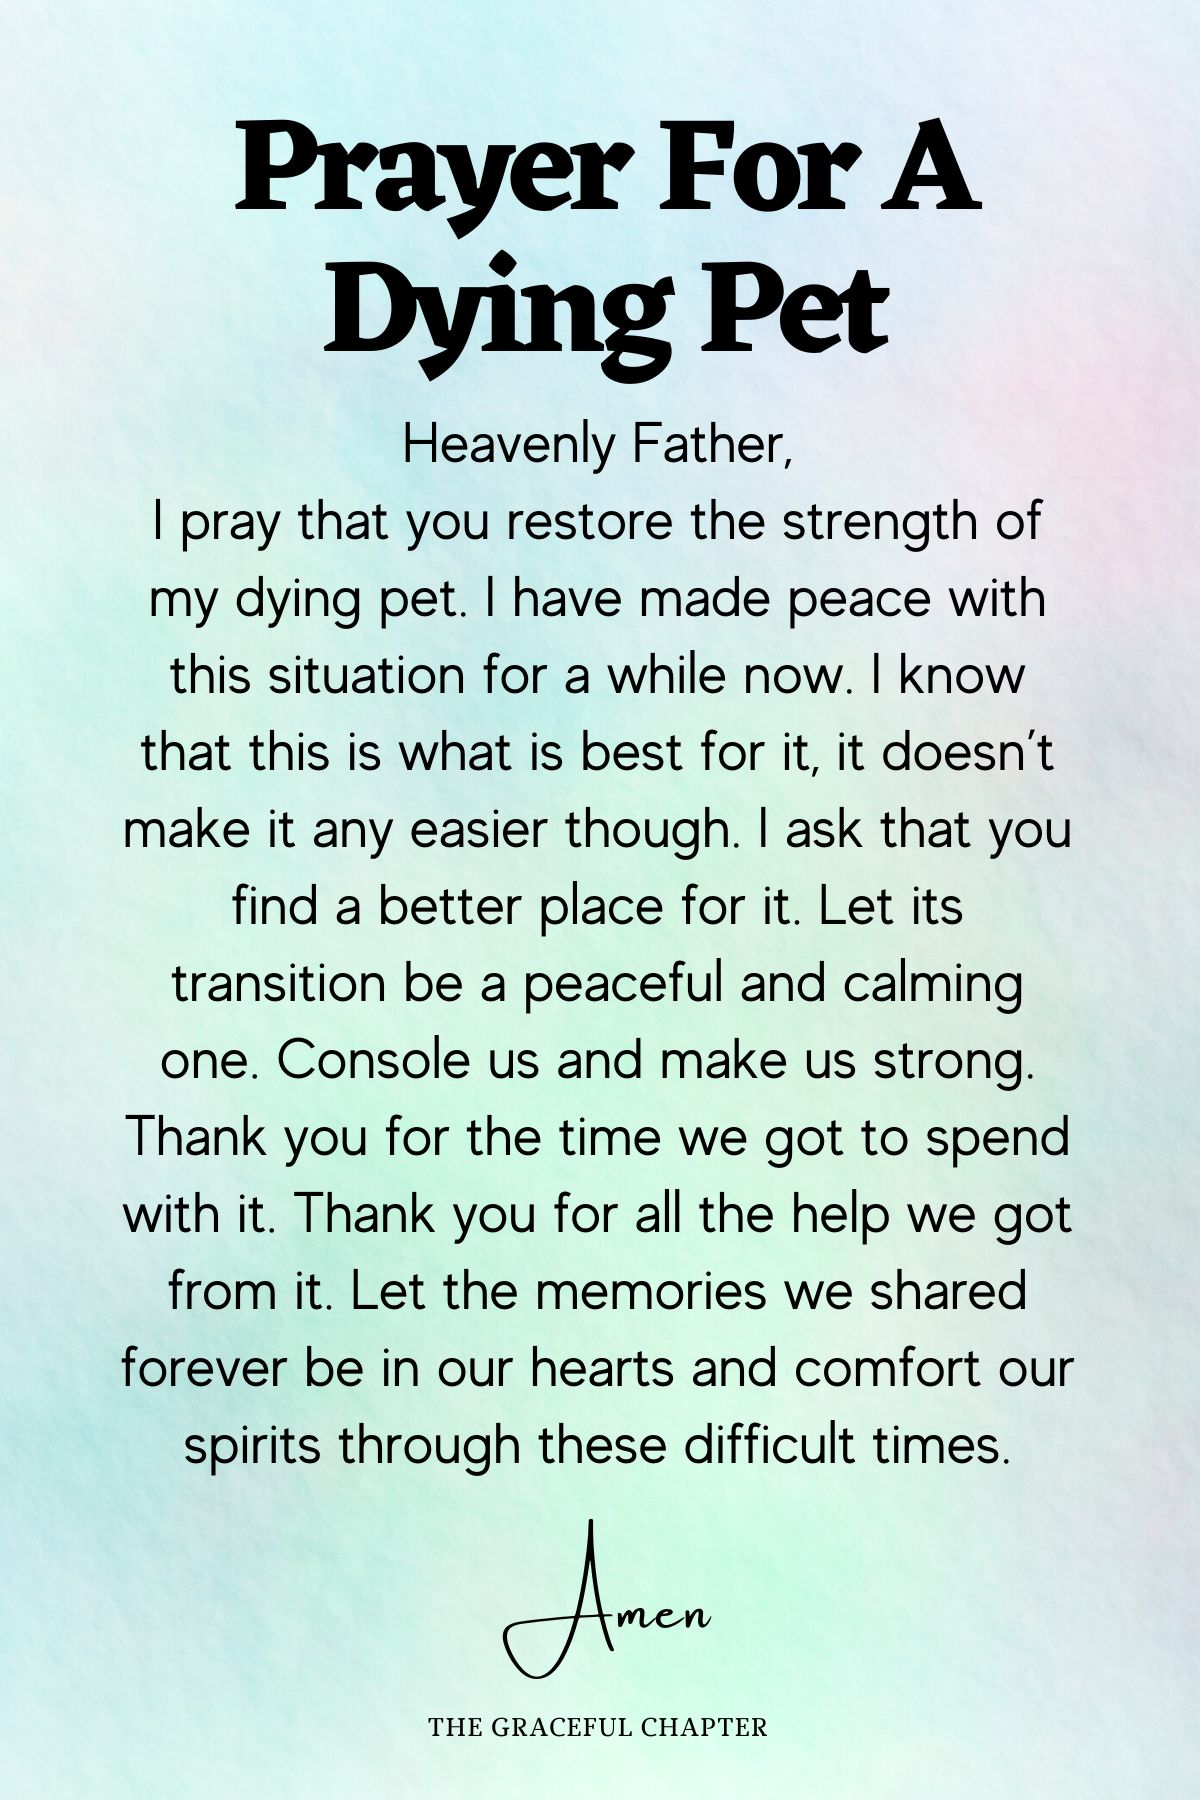 Prayer for a dying pet